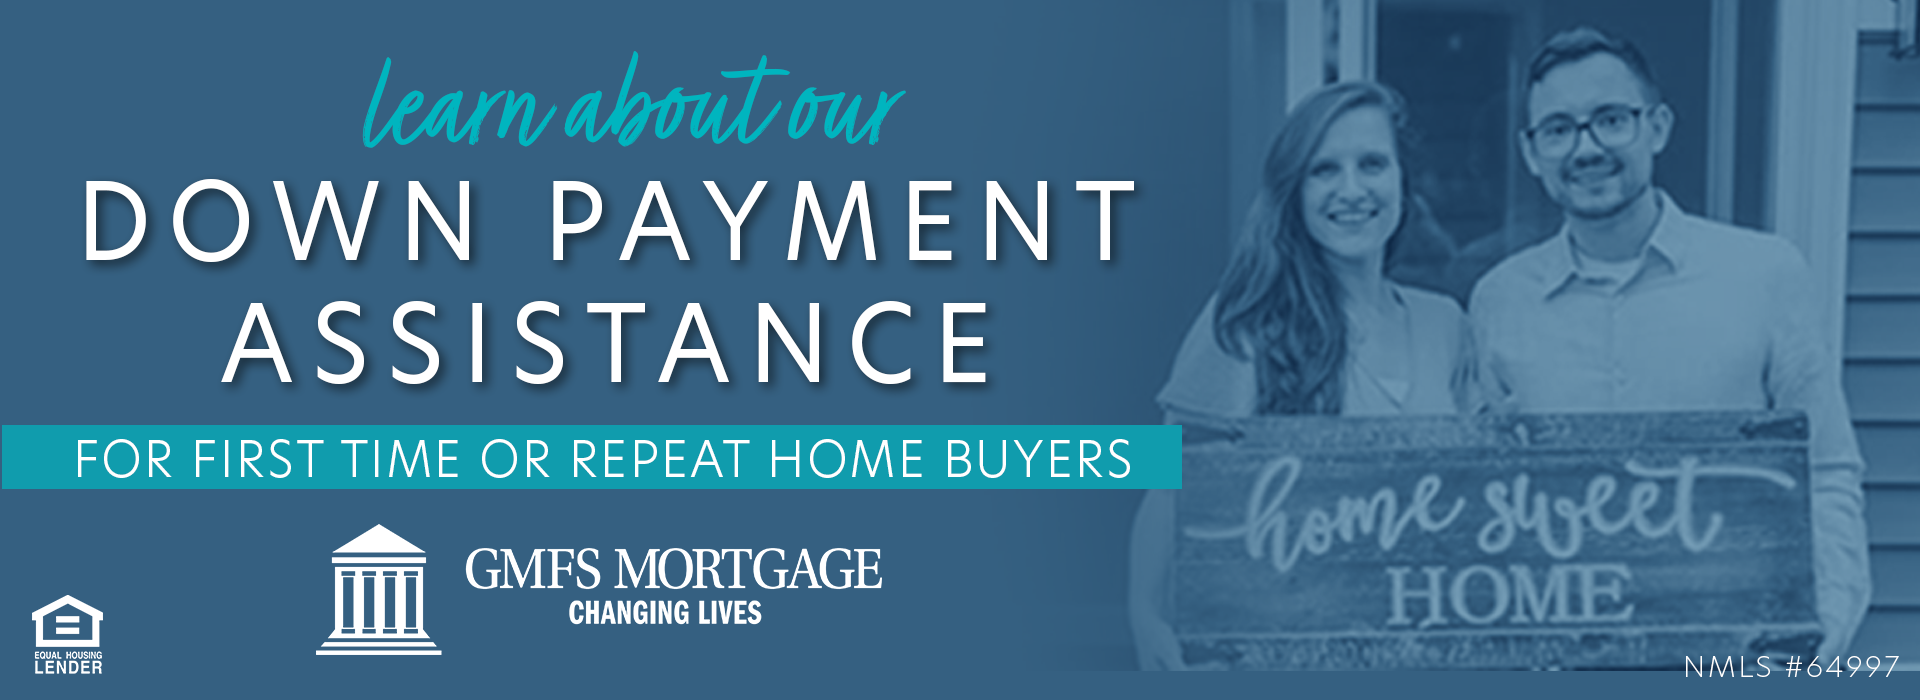 down payment assistance flyer